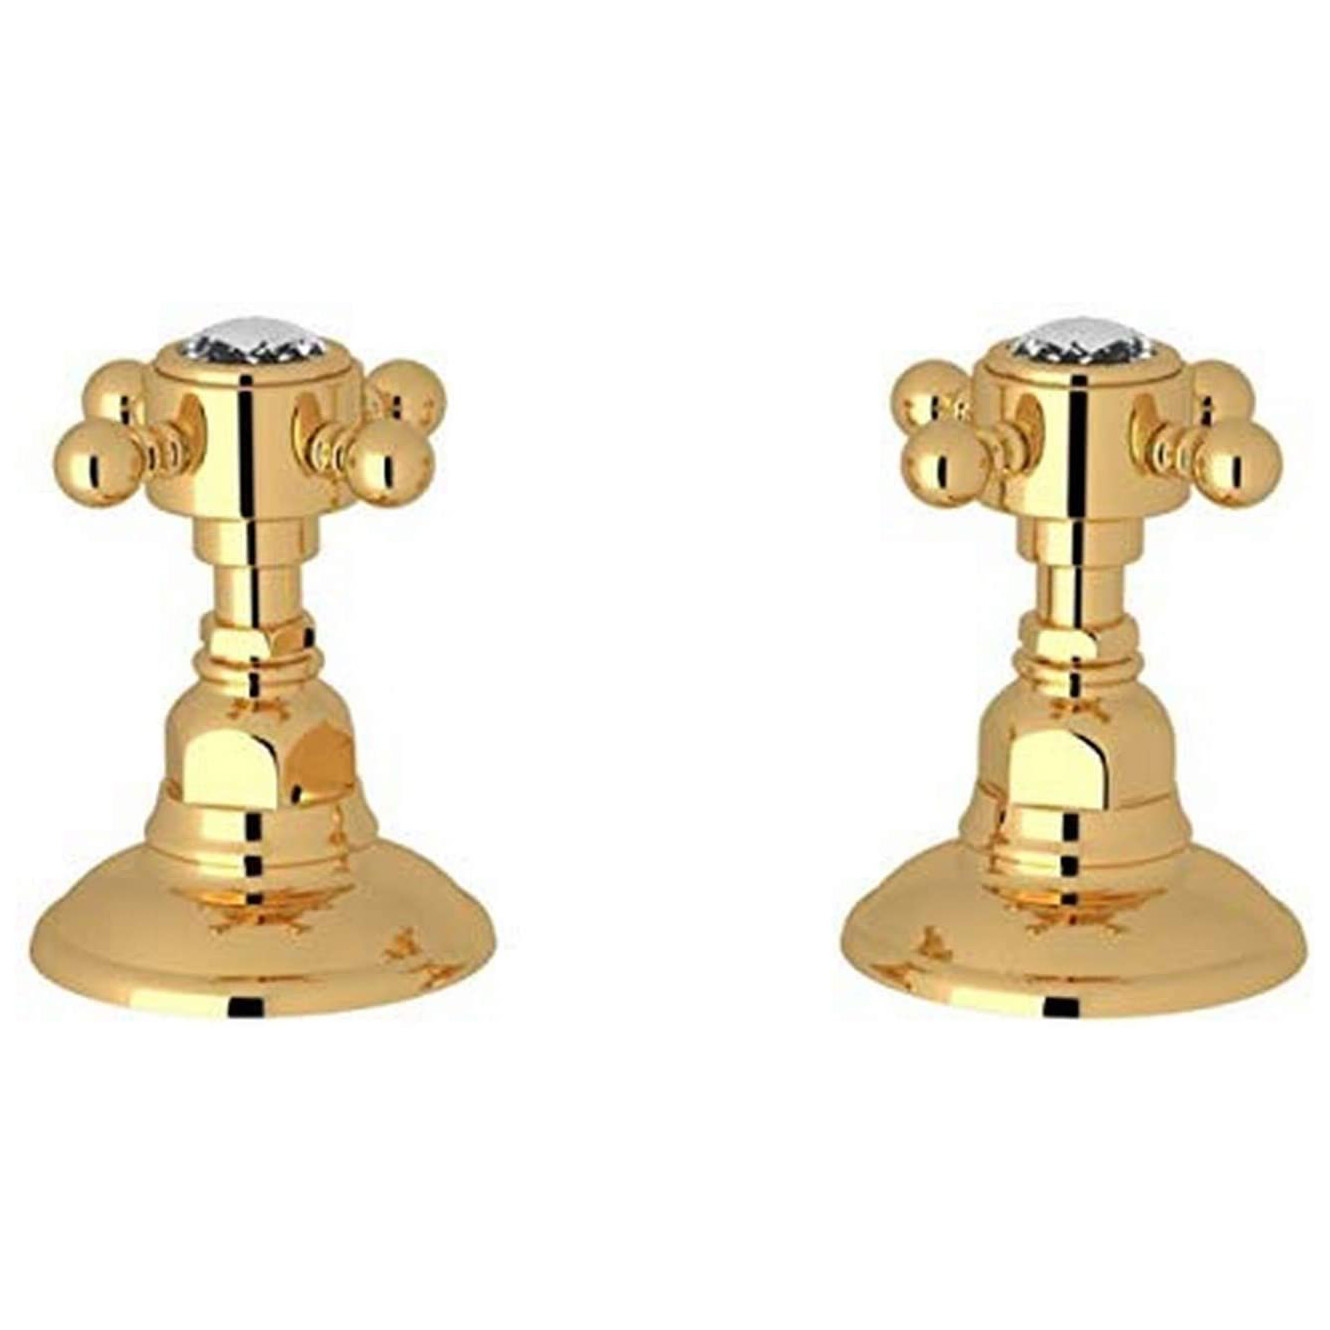 Country Bath Deck Mounted Sidevalves In Italian Brass